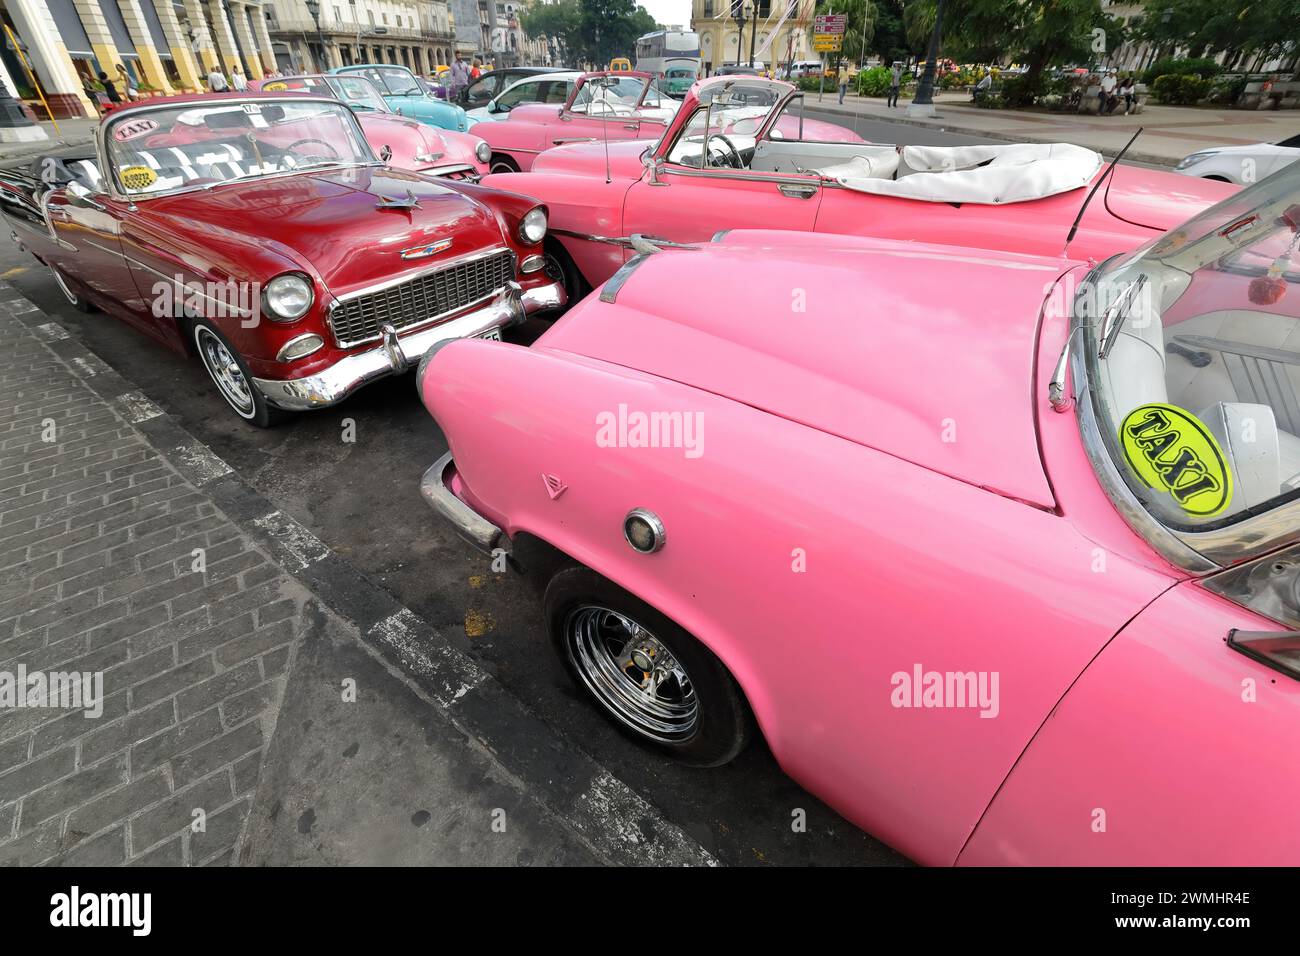 019 Mess old pink and red American classic cars -almendron, yank tank Mercury-Chevrolet- from 1952-53-55 parked on the Paseo del Prado. Havana-Cuba. Stock Photo